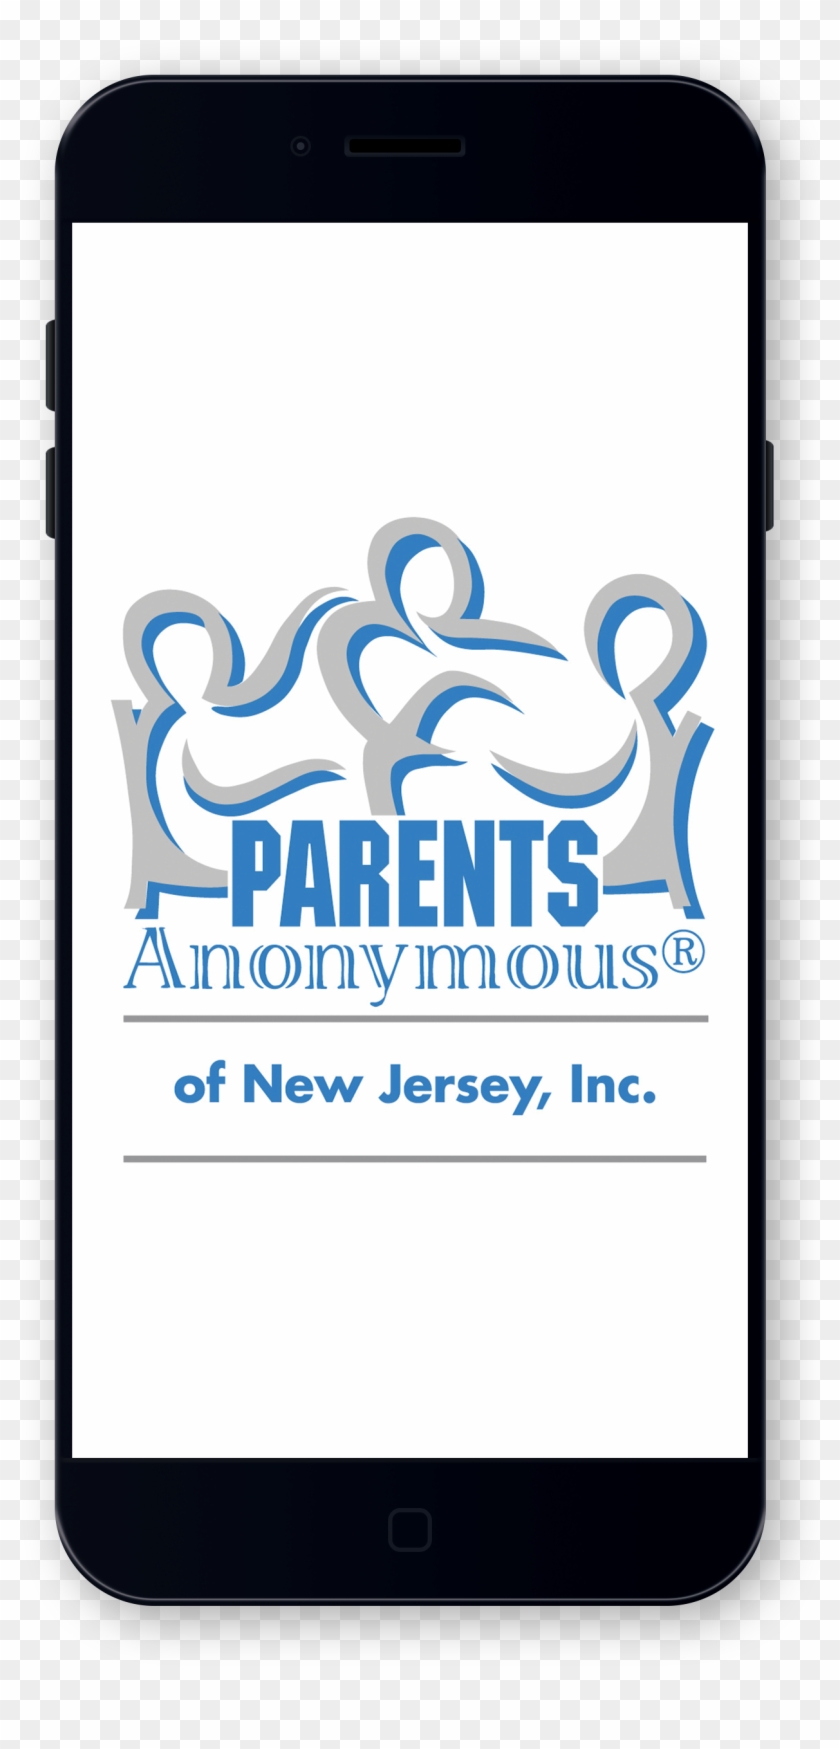 Parents Anonymous Was Founded Through A Partnership Clipart #700334